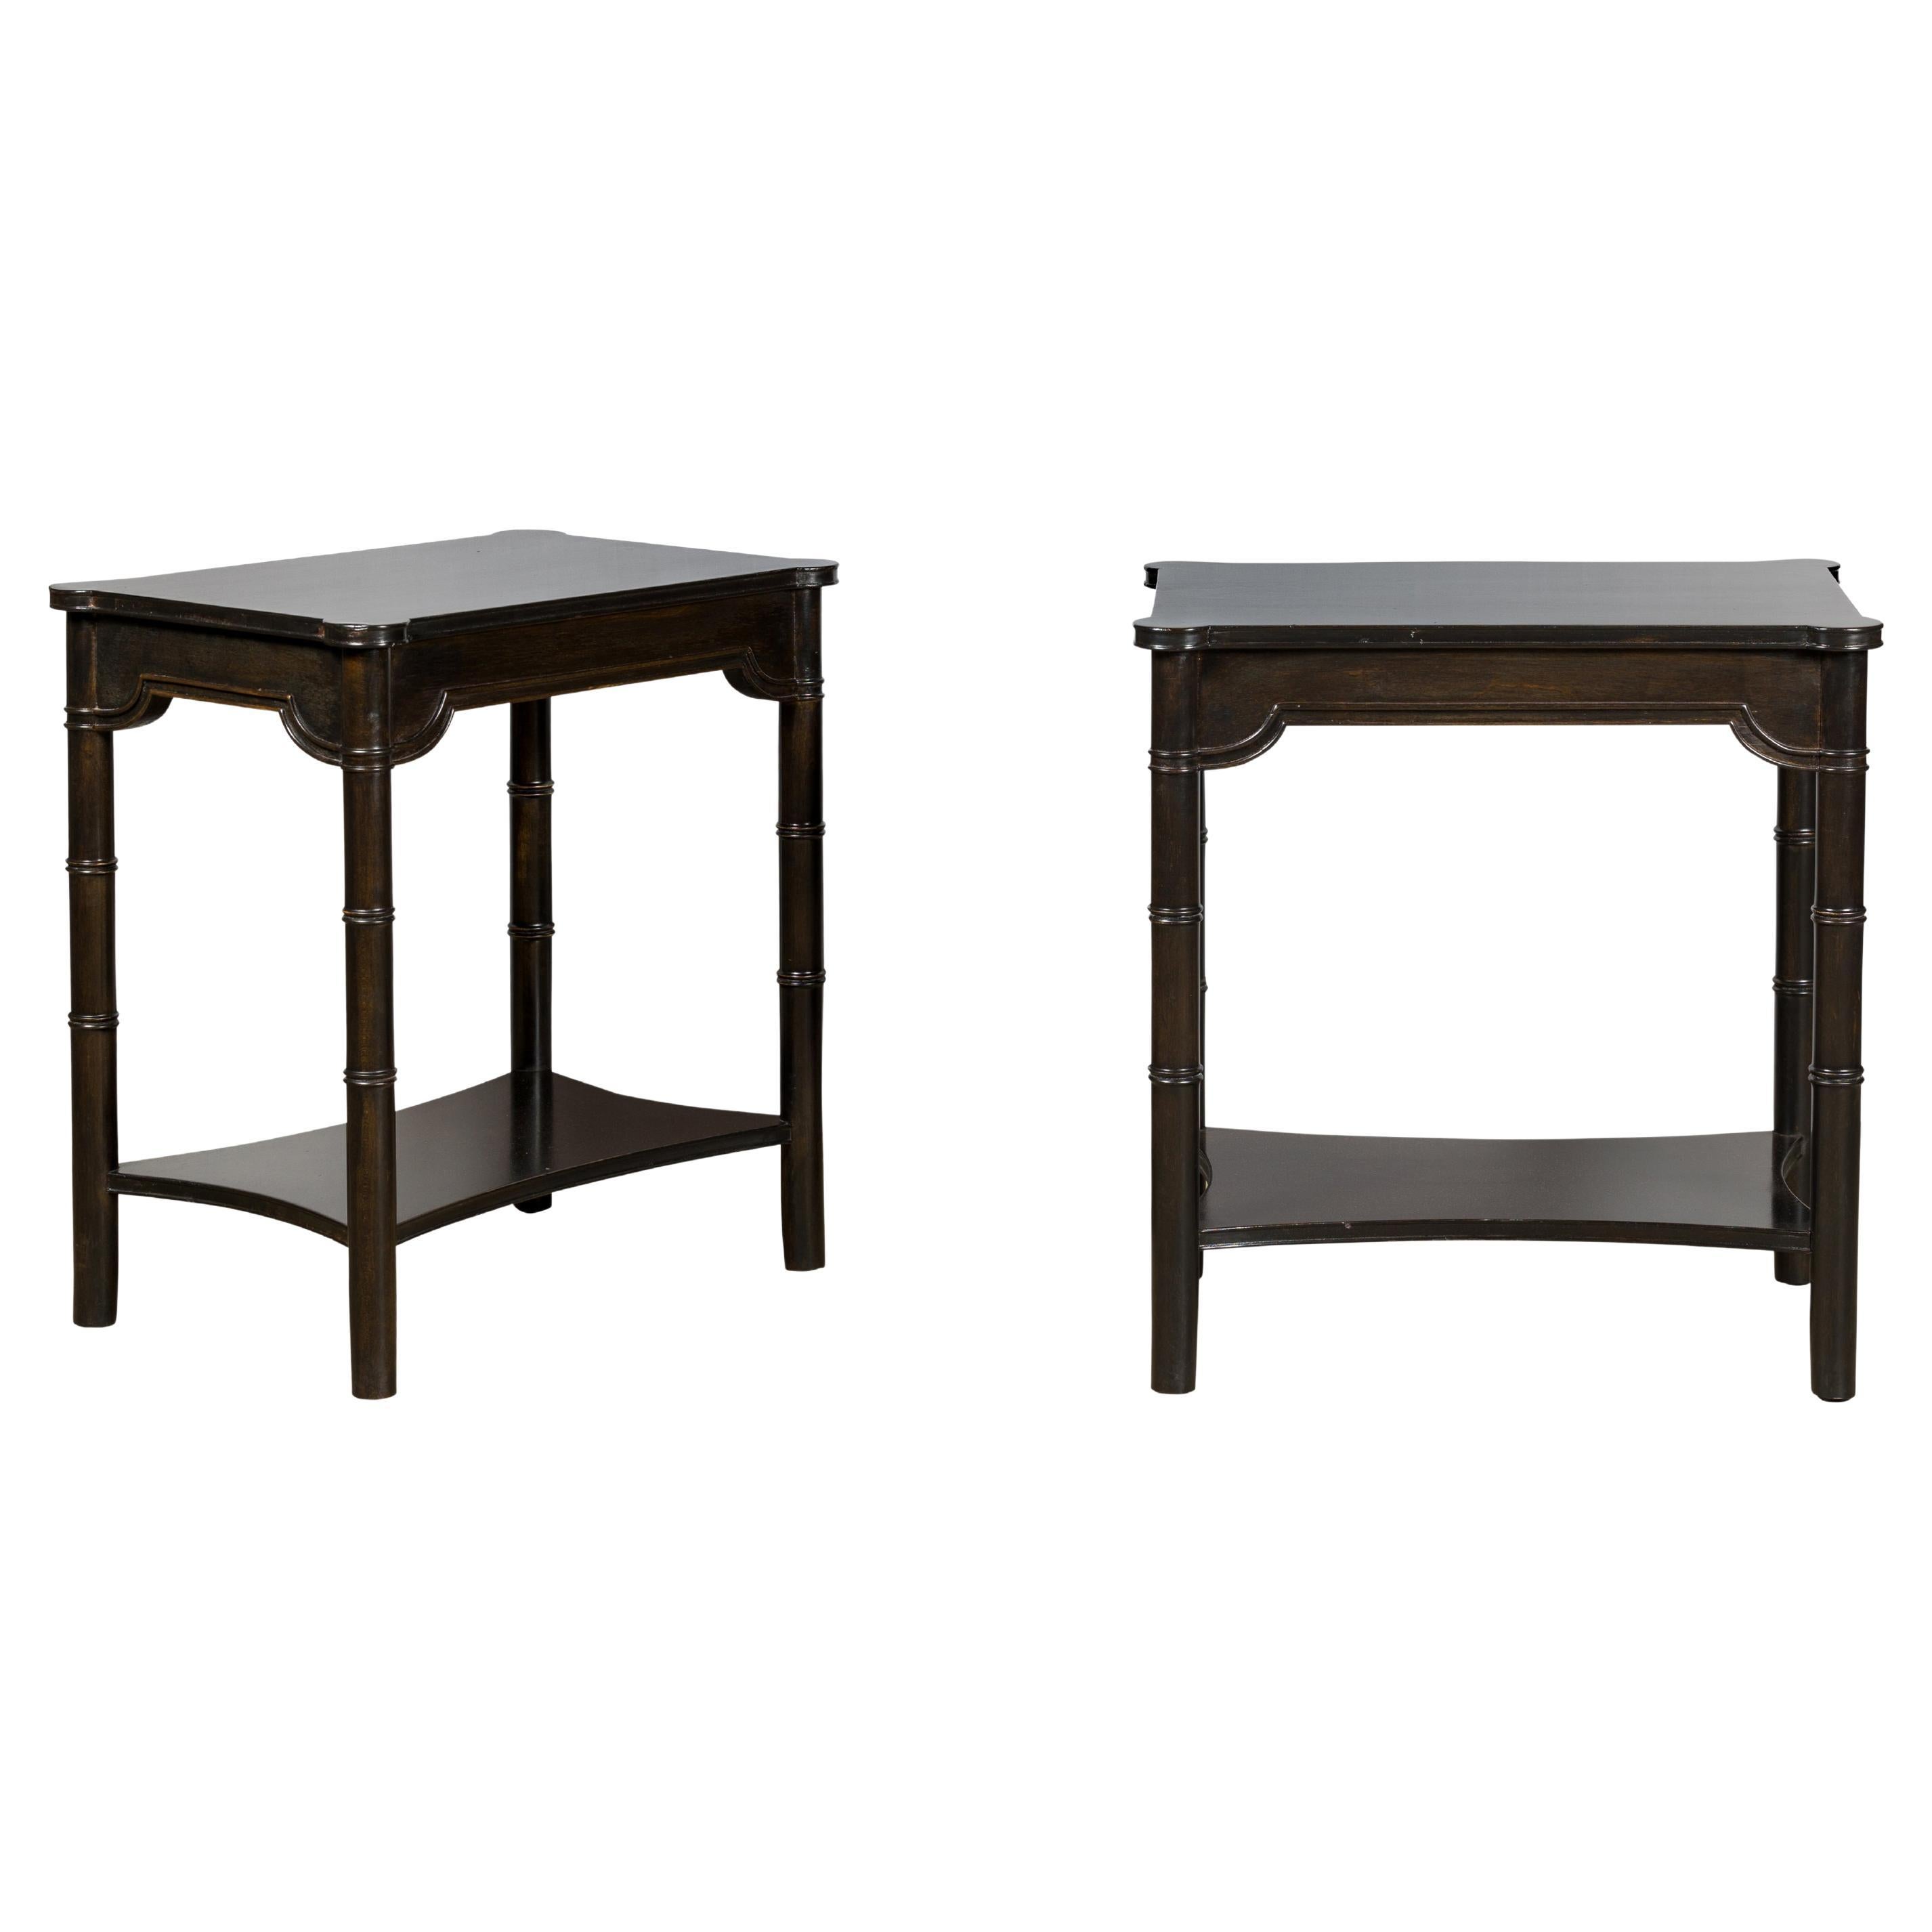 Midcentury English Ebonized Faux Bamboo Side Tables with Carved Aprons, a Pair For Sale